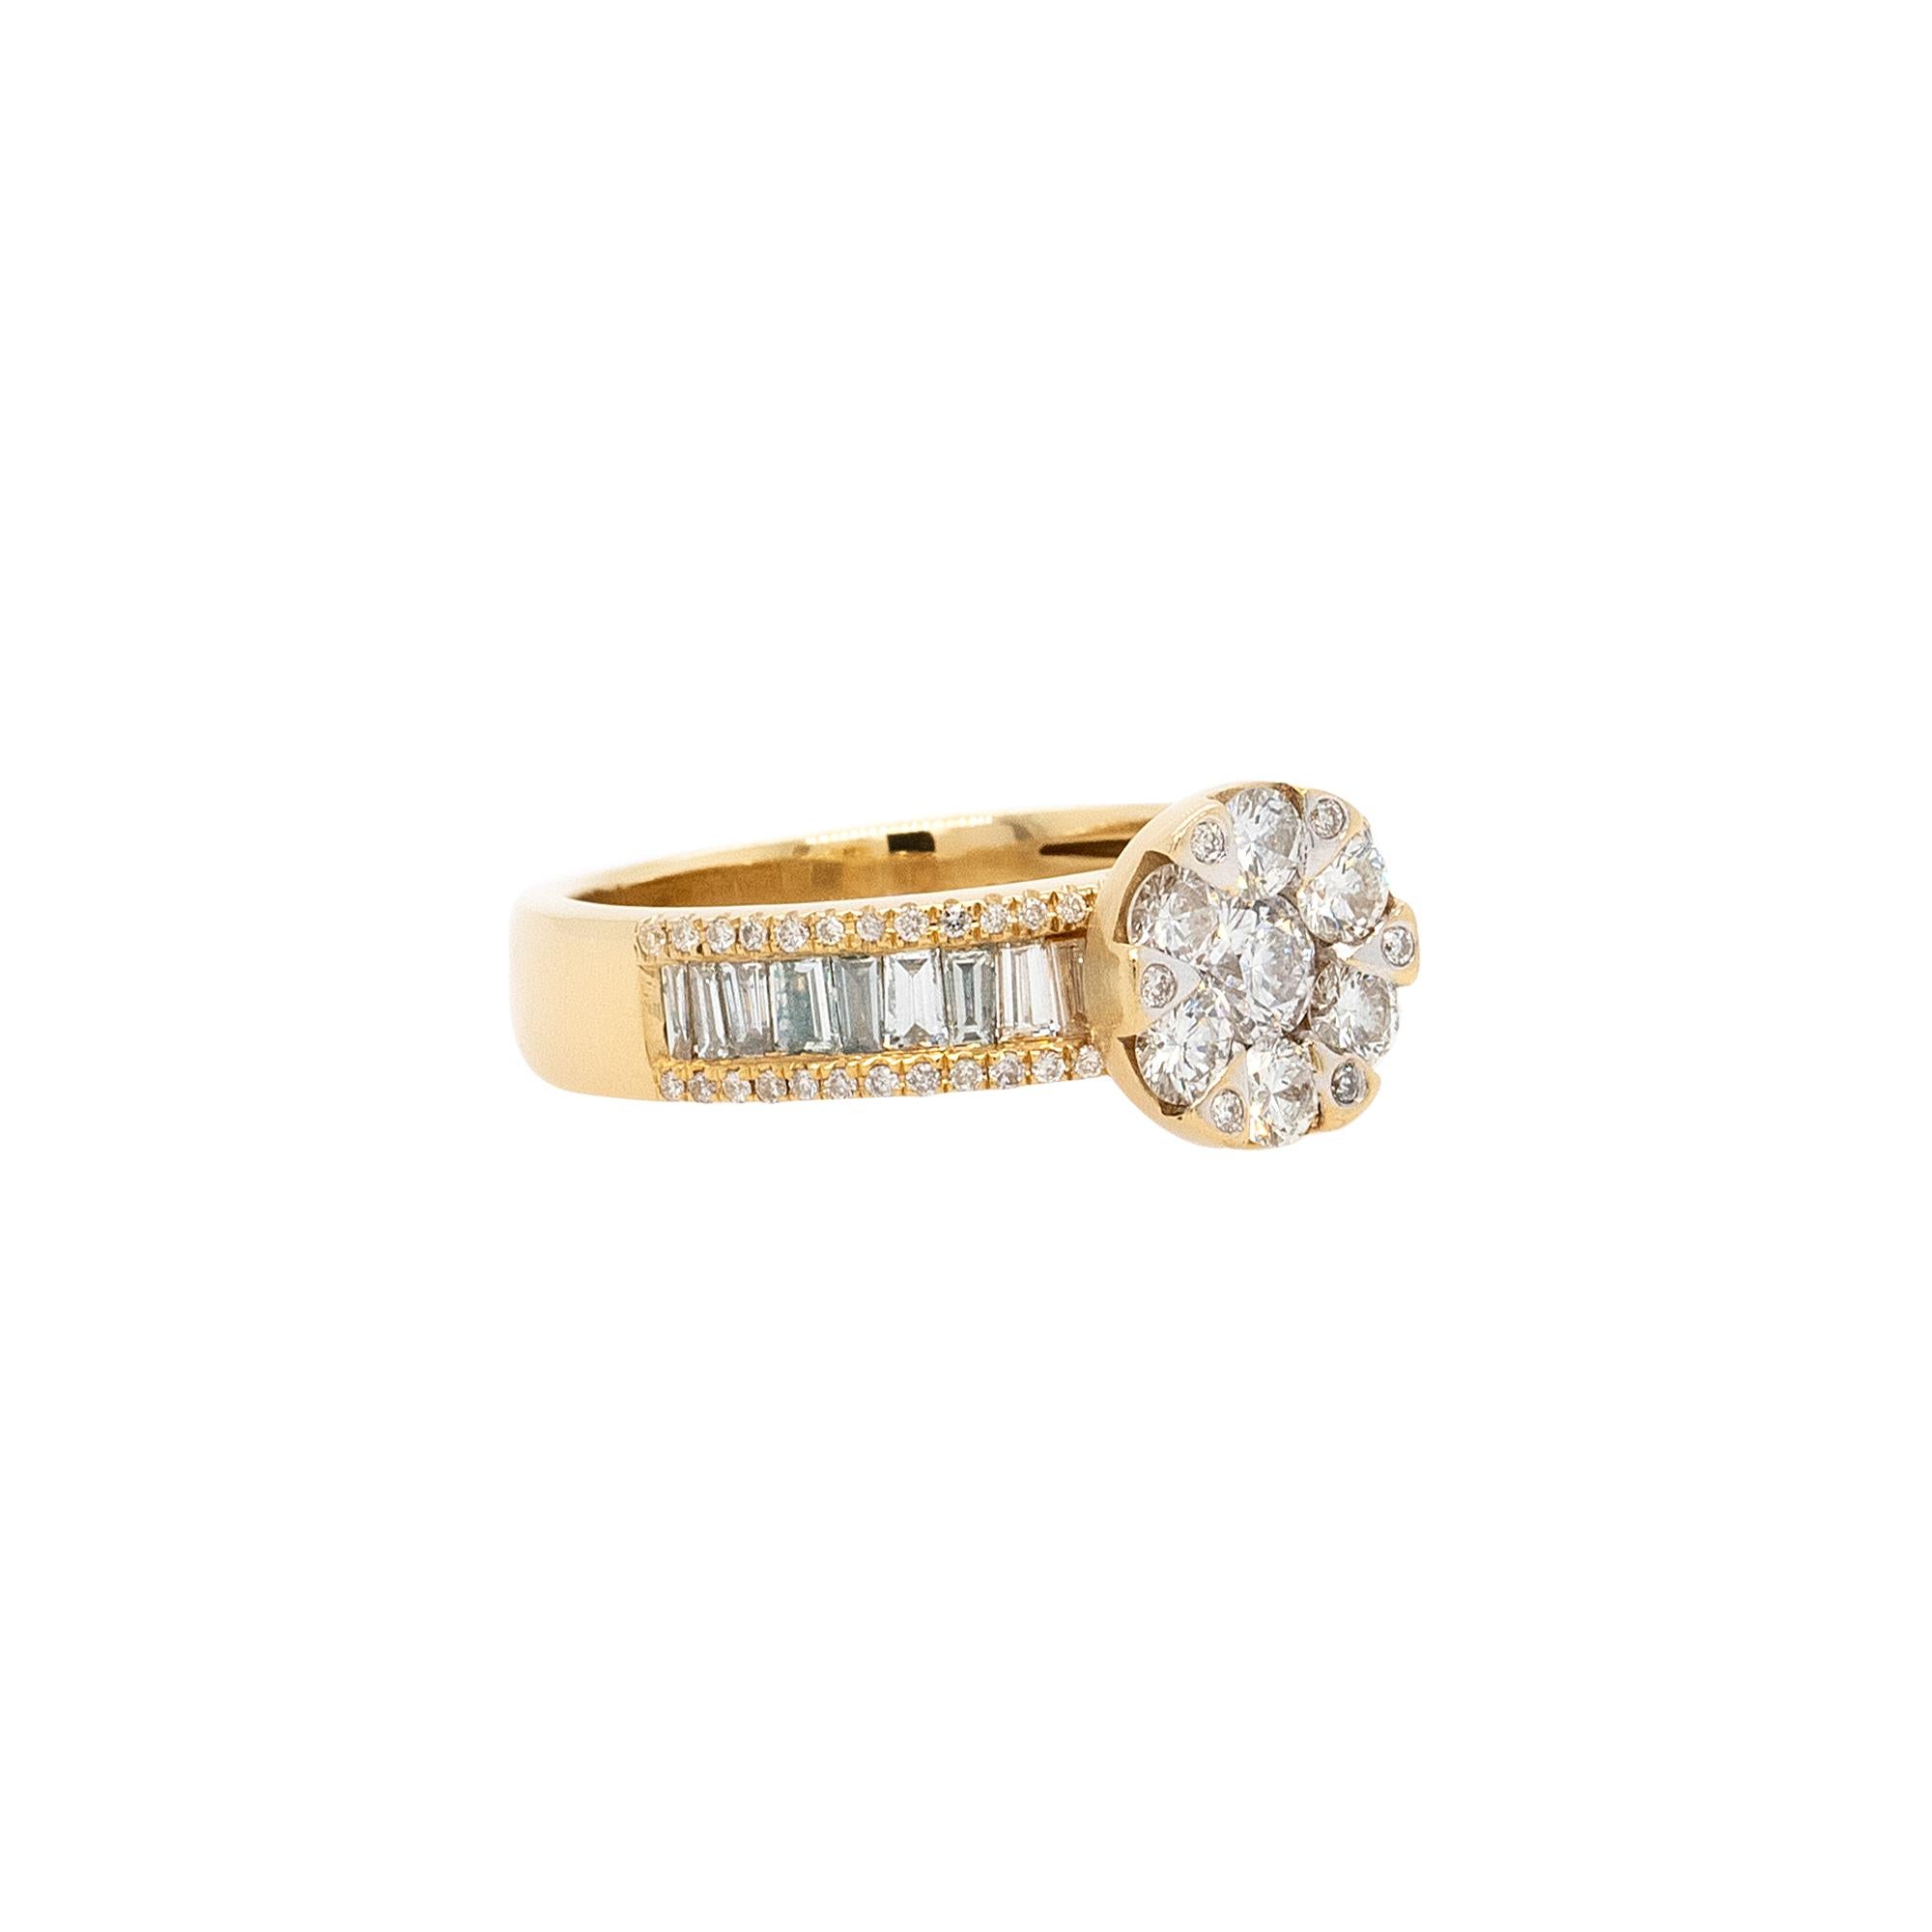 Center Details:
0.35ctw Round Brilliant Natural Diamonds
G/H Color SI Clarity
Sides Stones Details: 
1.03ctw of Baguette and Round Diamonds
G/H Color SI Clarity
Ring Material: 18k Yellow Gold
Ring Size: 7.5 (can be sized)
Total Weight: 7.78g